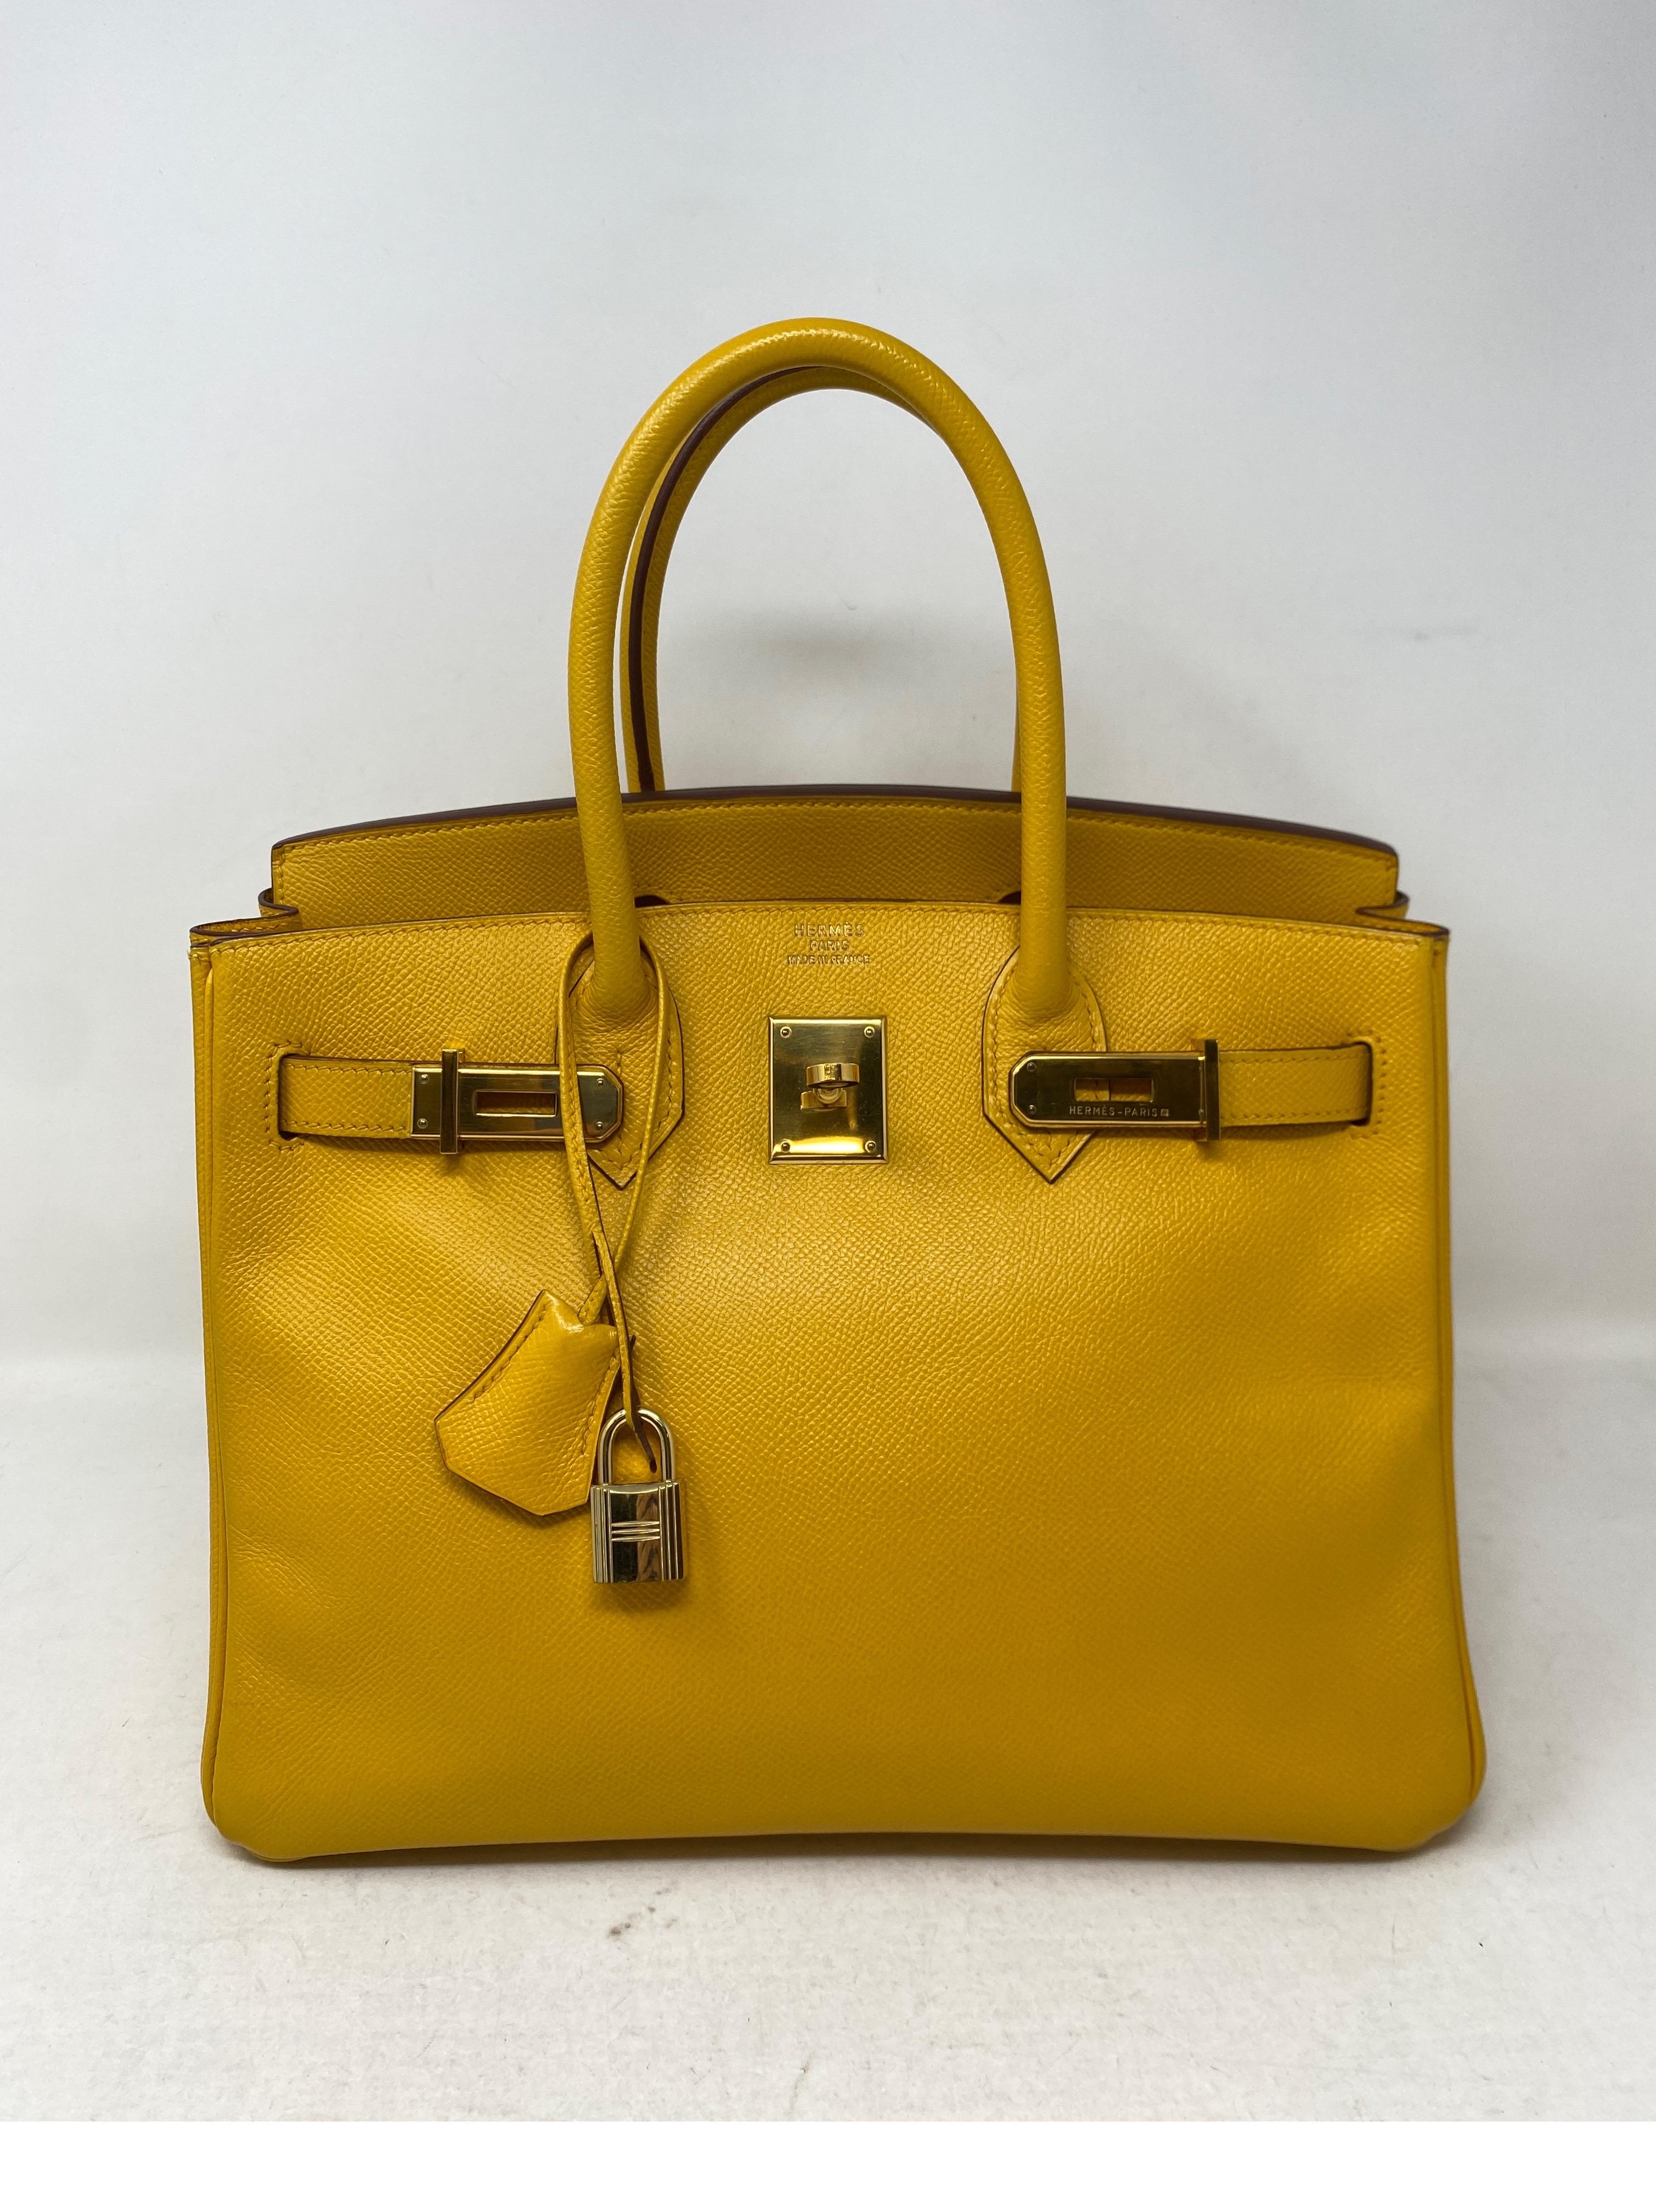 Hermes Jaune Yellow Birkin 30 Bag. Bright yellow color with gold hardware. Epsom leather. Nice structure and clean interior. Bag has been redyed. Condition is very good. Includes clochette, lock, keys, and dust bag. Guaranteed authentic. 